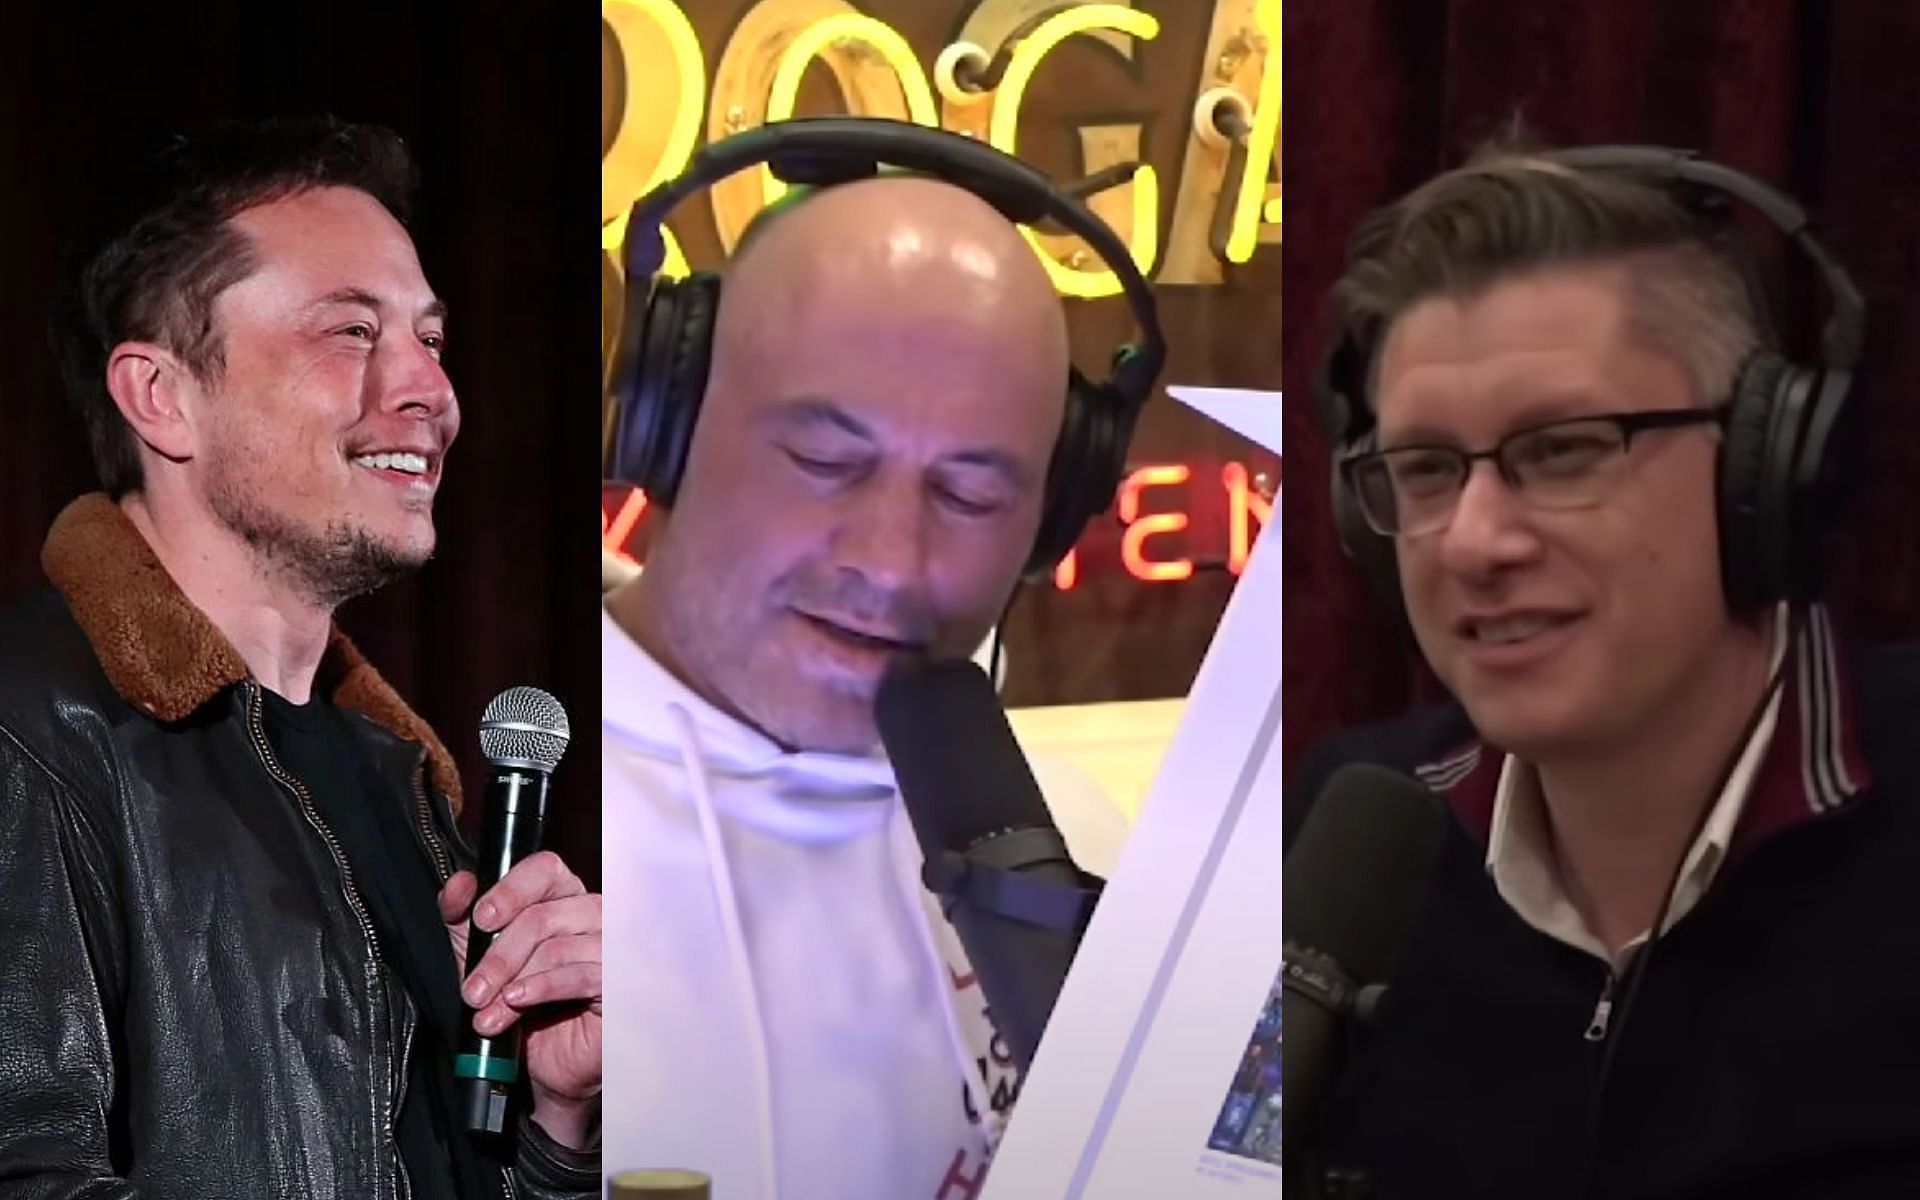 Elon Musk (left), Joe Rogan (middle), Beeple (right) [Images courtesy of PowerfulJRE on YouTube]